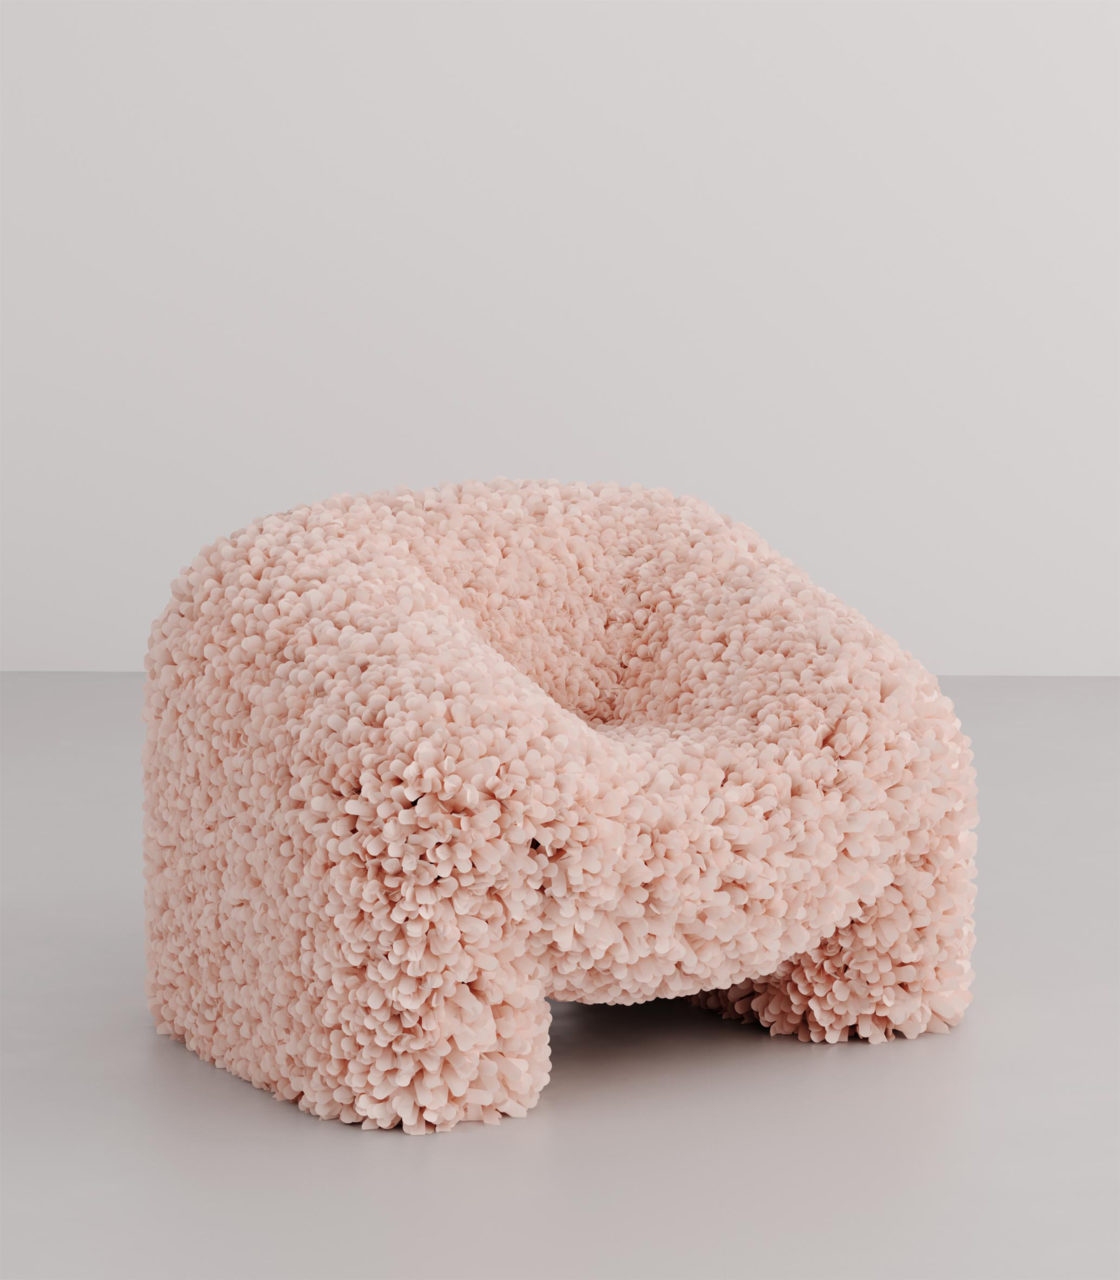 a pink, organic-shaped armchair upholstered in a loose weave textile